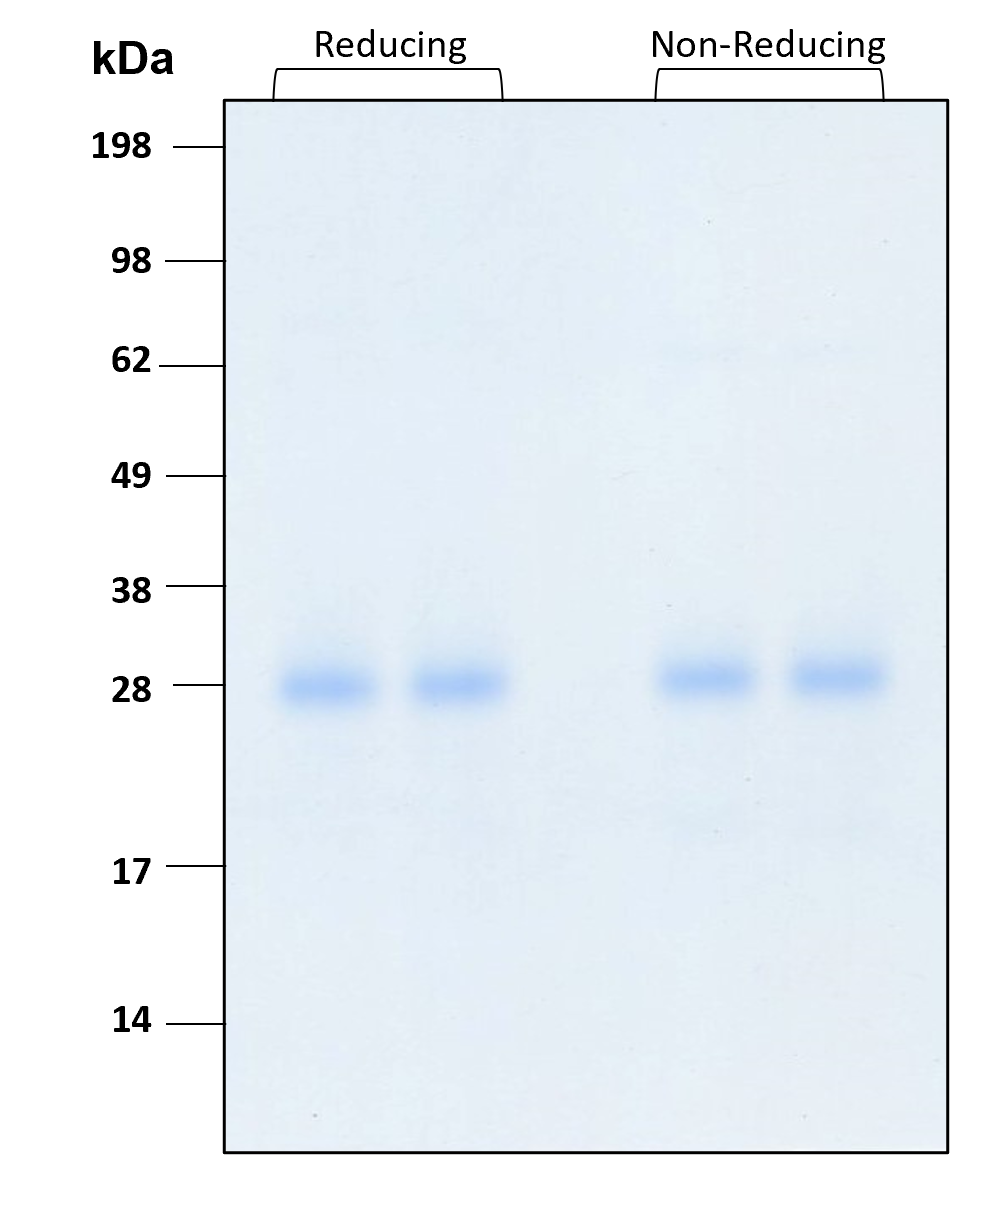 Purity of recombinant human IFN gamma was determined by SDS- polyacrylamide gel electrophoresis. The protein was resolved in an SDS- polyacrylamide gel in reducing and non-reducing conditions and stained using Coomassie blue